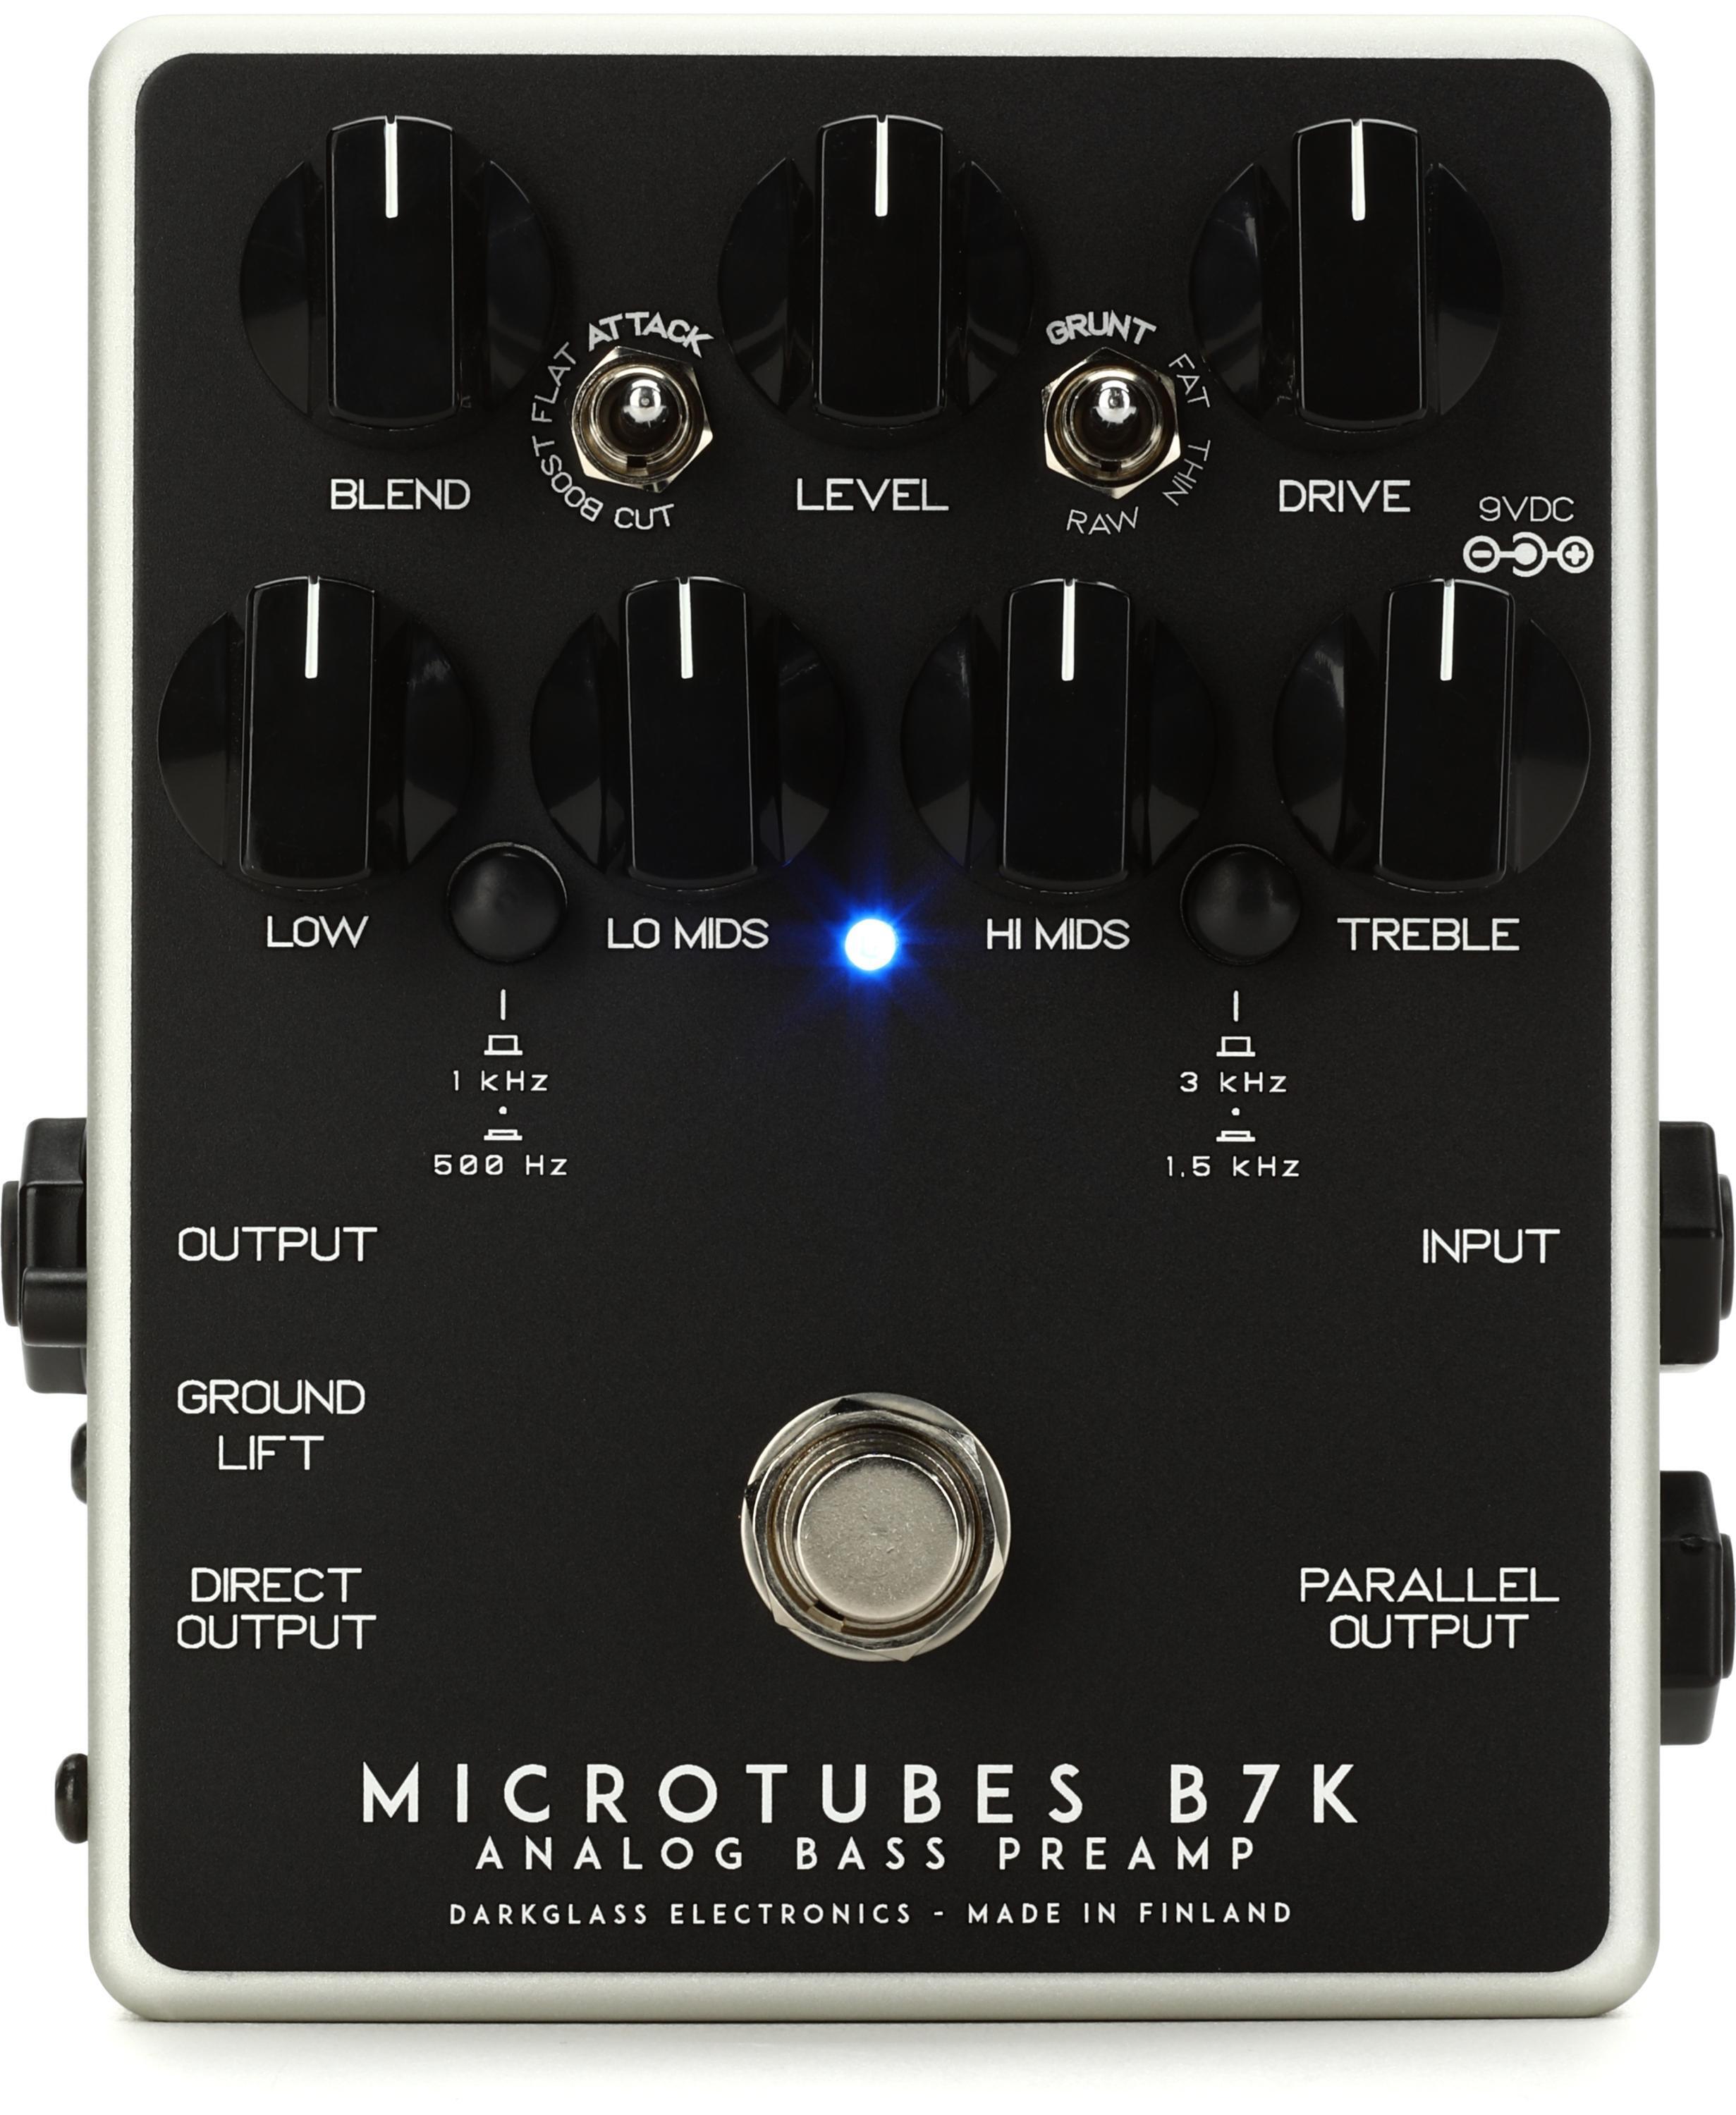 Darkglass Microtubes B7K V2 Bass Preamp Pedal | Sweetwater